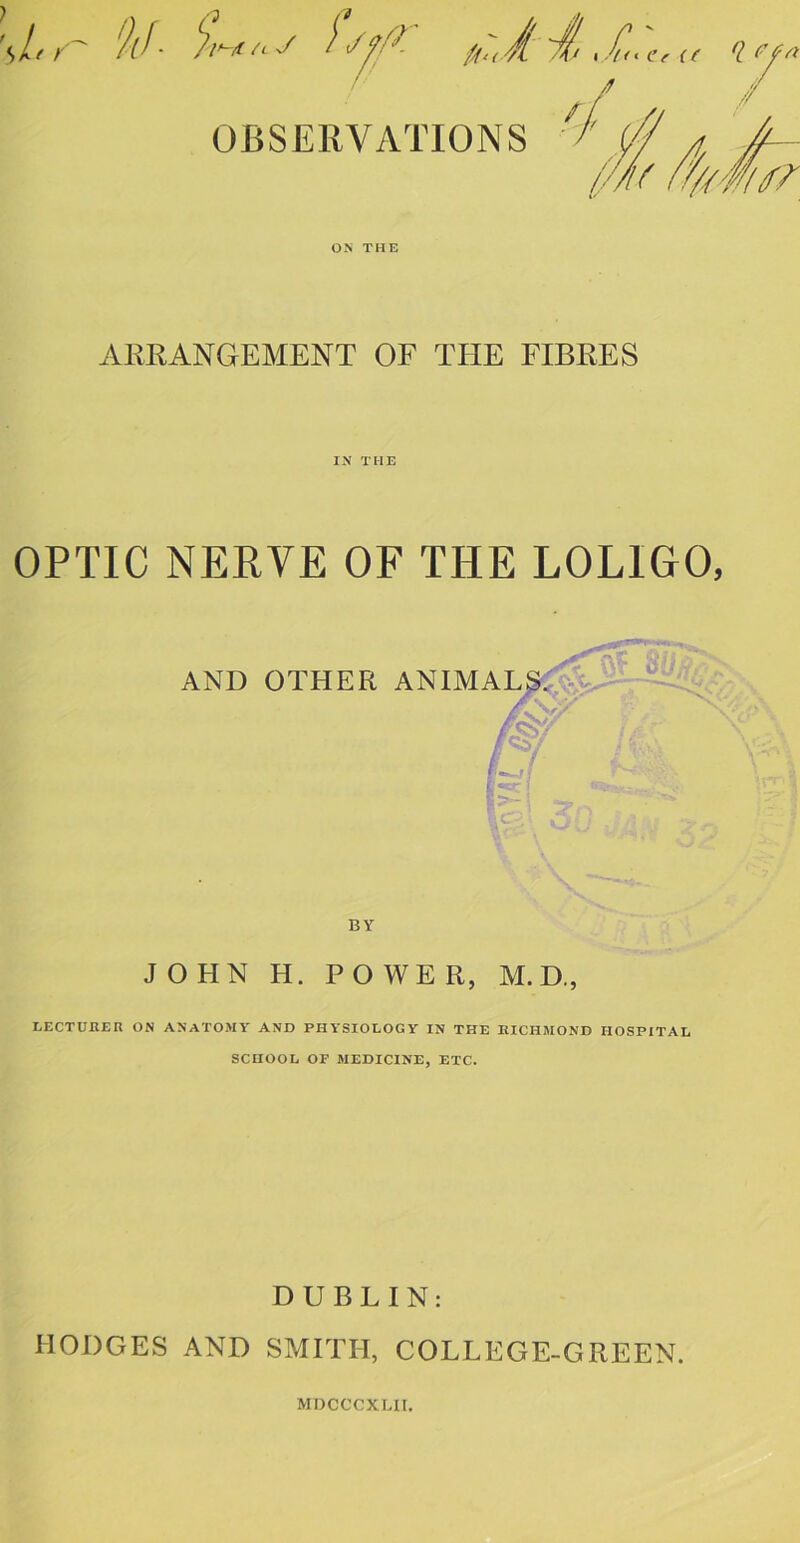 ON THE ARRANGEMENT OF THE FIBRES IN THE OPTIC NERVE OF THE LOLIGO, \.:A r r--\S 1 «■ i : <0 : ■ V BY JOHN H. POWER, M.D., LECTUKER ON ANATOMY AND PHYSIOLOGY IN THE RICHMOND HOSPITAL SCHOOL OF MEDICINE, ETC. DUBLIN: HODGES AND SMITH, COLLEGE-GREEN. MOCCCXHT.